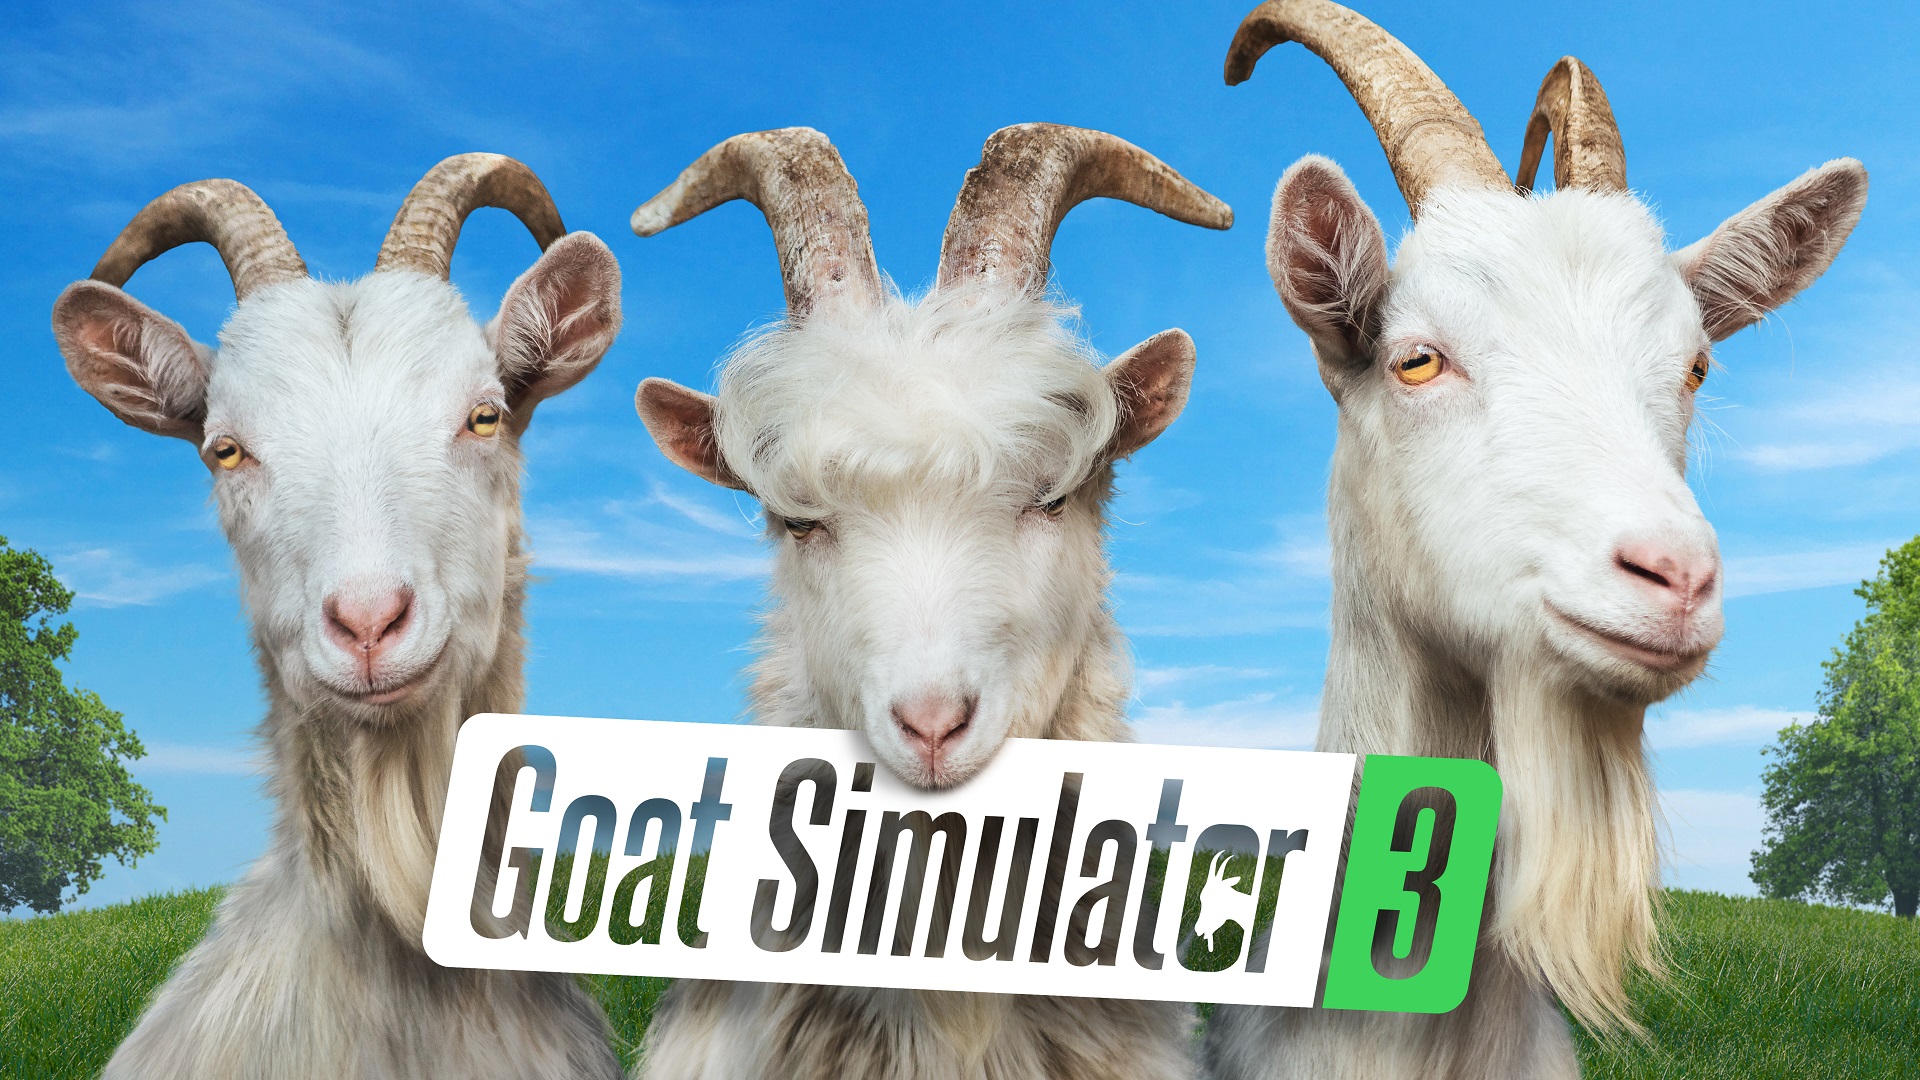 Goat Simulator 3 announced for PC and consoles, preorders include “pre-udder gear”